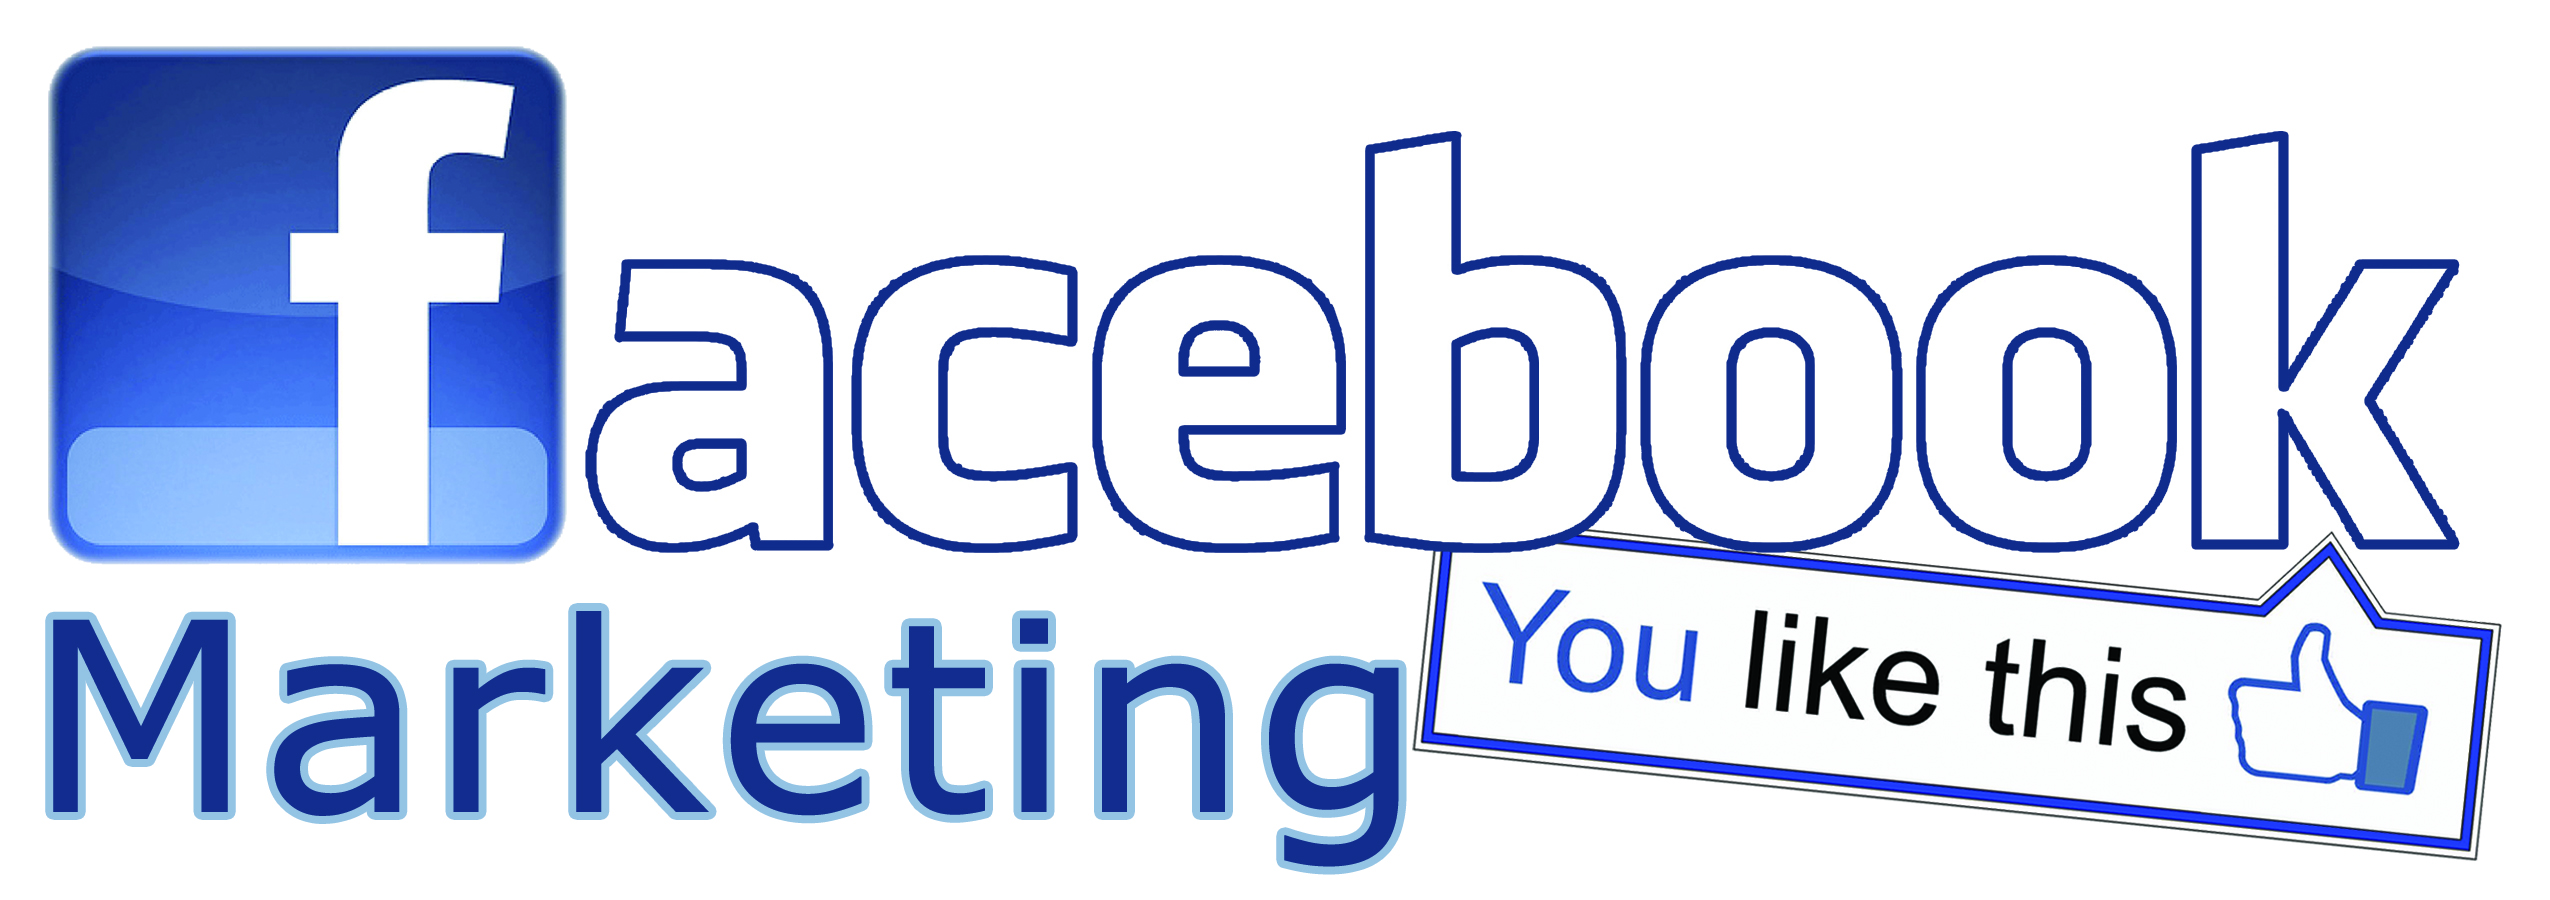 Six Facebook Marketing Tips From The Pros